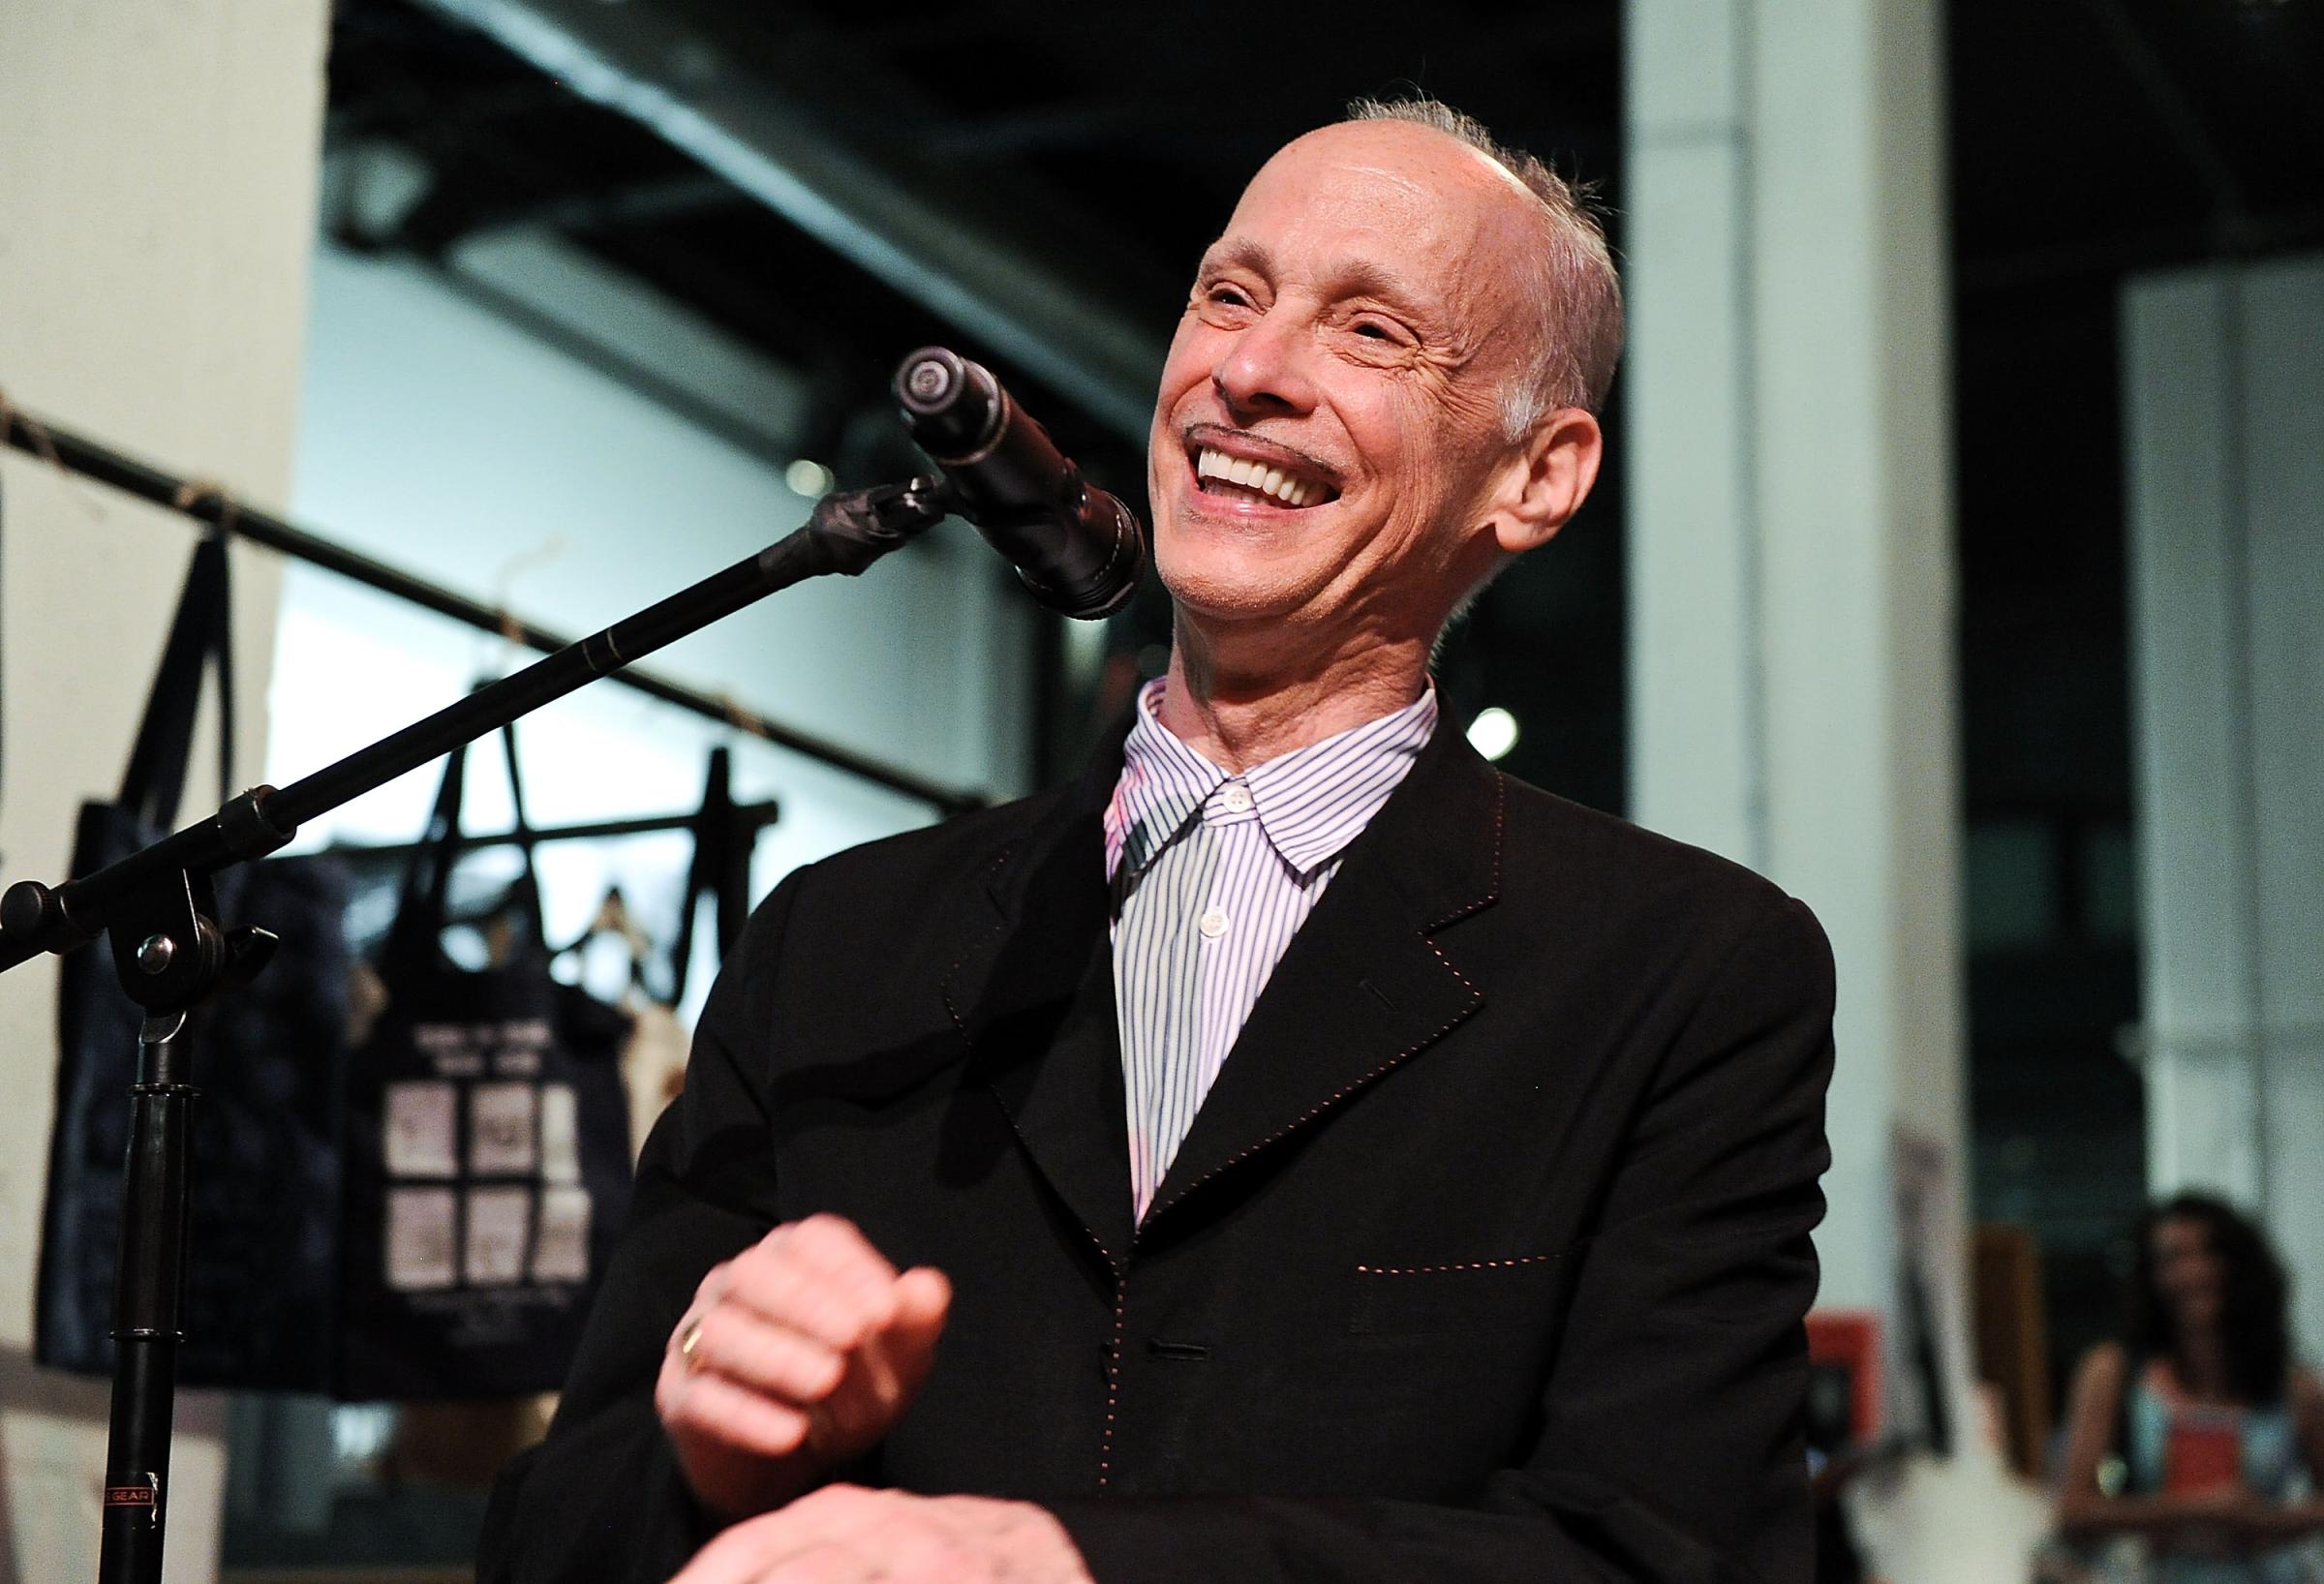 John Waters at the book launch party for his book "Carsick" in New York City on May 27, 2015.